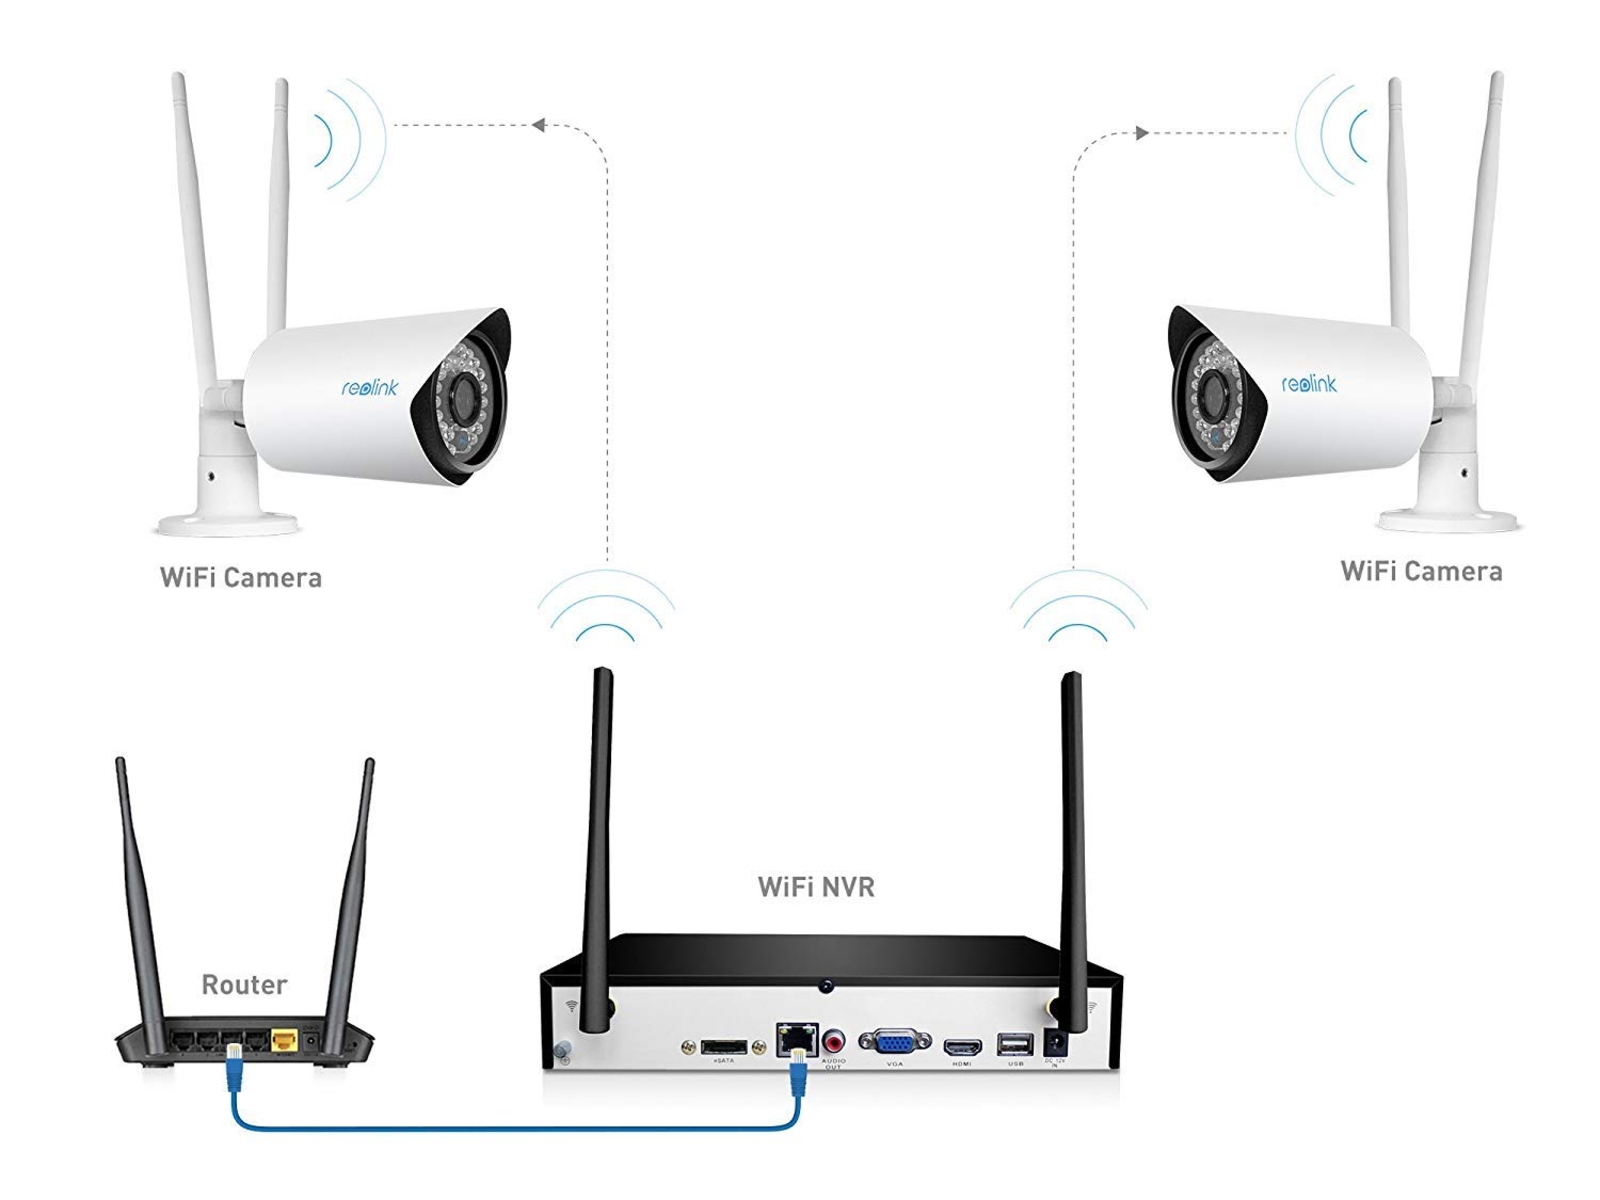 How To Connect Ip Camera To Wireless Router